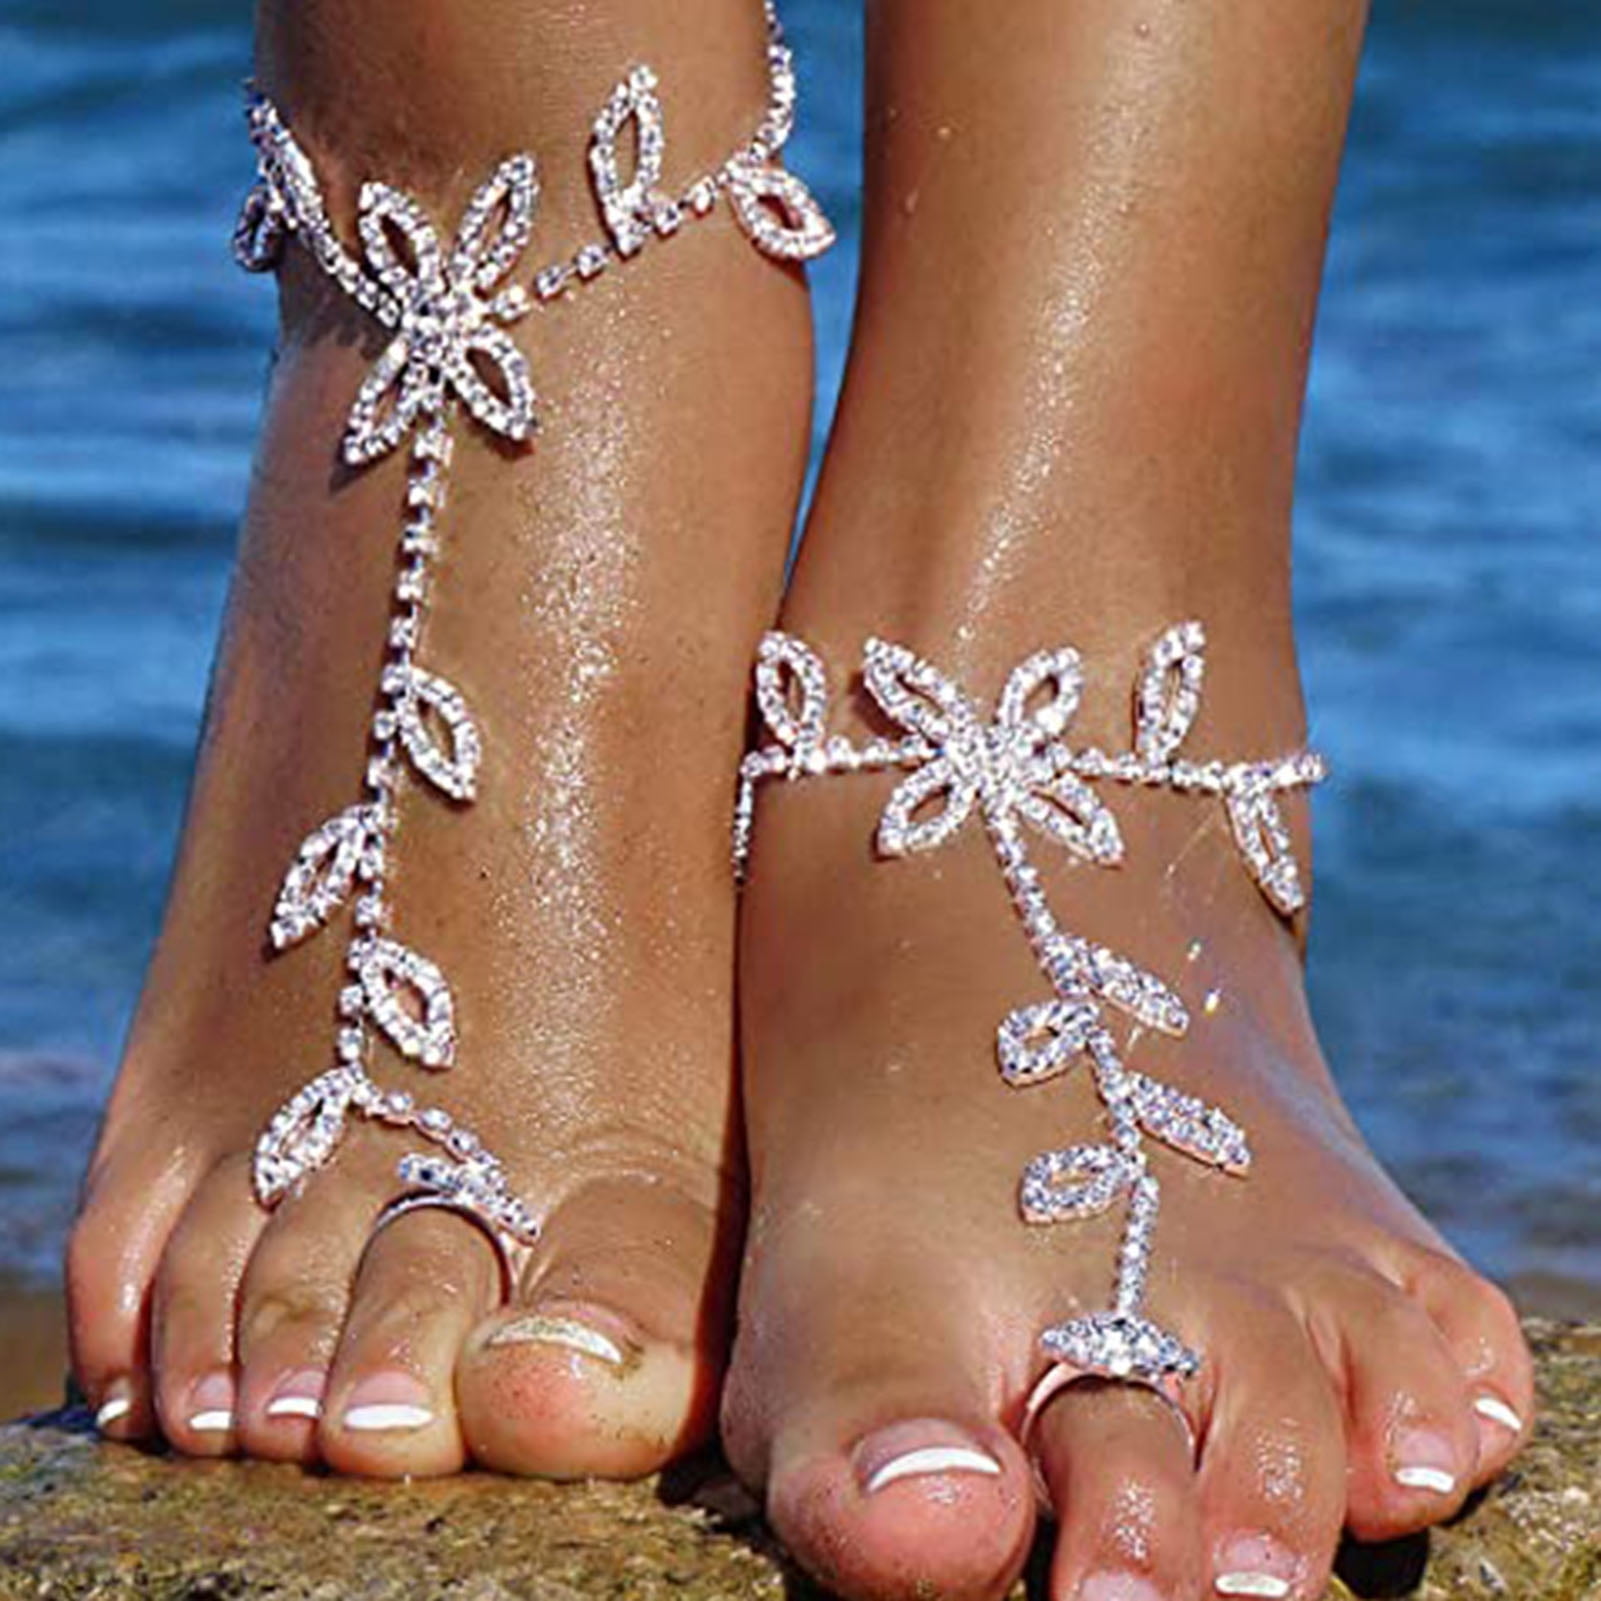 Buy Barefoot Sandals, Barefoot Shoes, Beach Wedding Barefoot Sandal, Pearl  Barefoot Shoes, Bridal Barefoot Sandals, Footless Sandal, Shoes, Gift  Online in India - Etsy